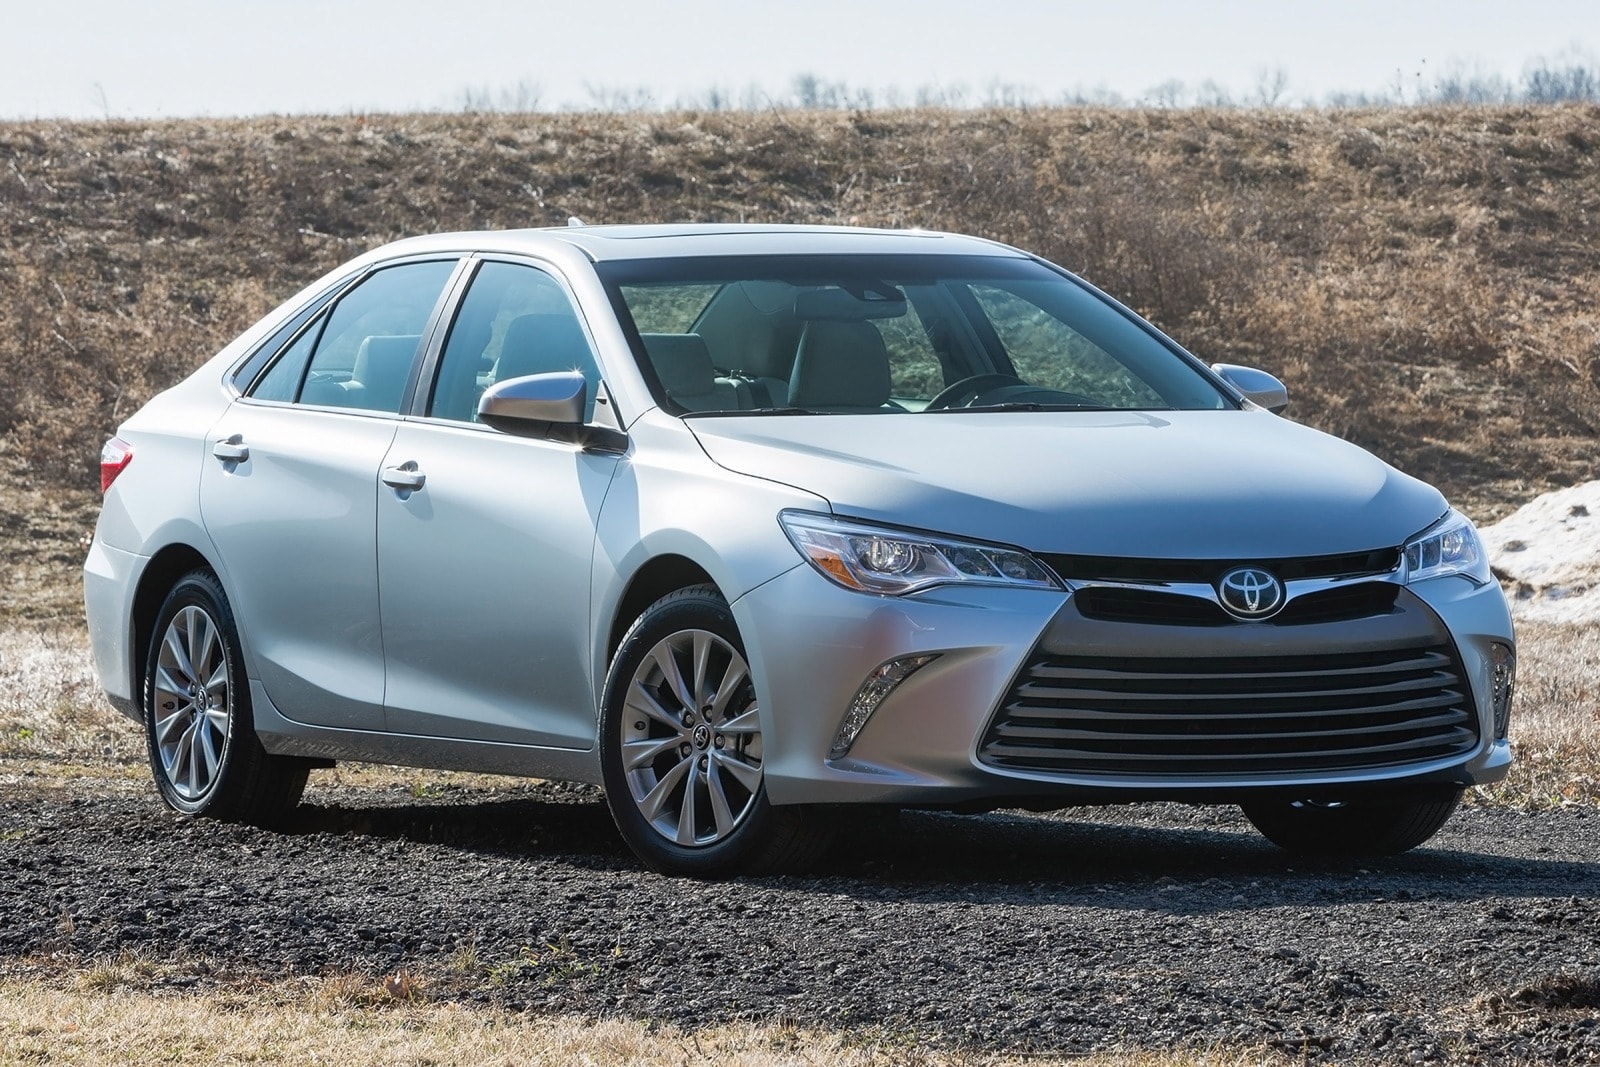 2015 Toyota Camry Hybrid Review & Ratings | Edmunds